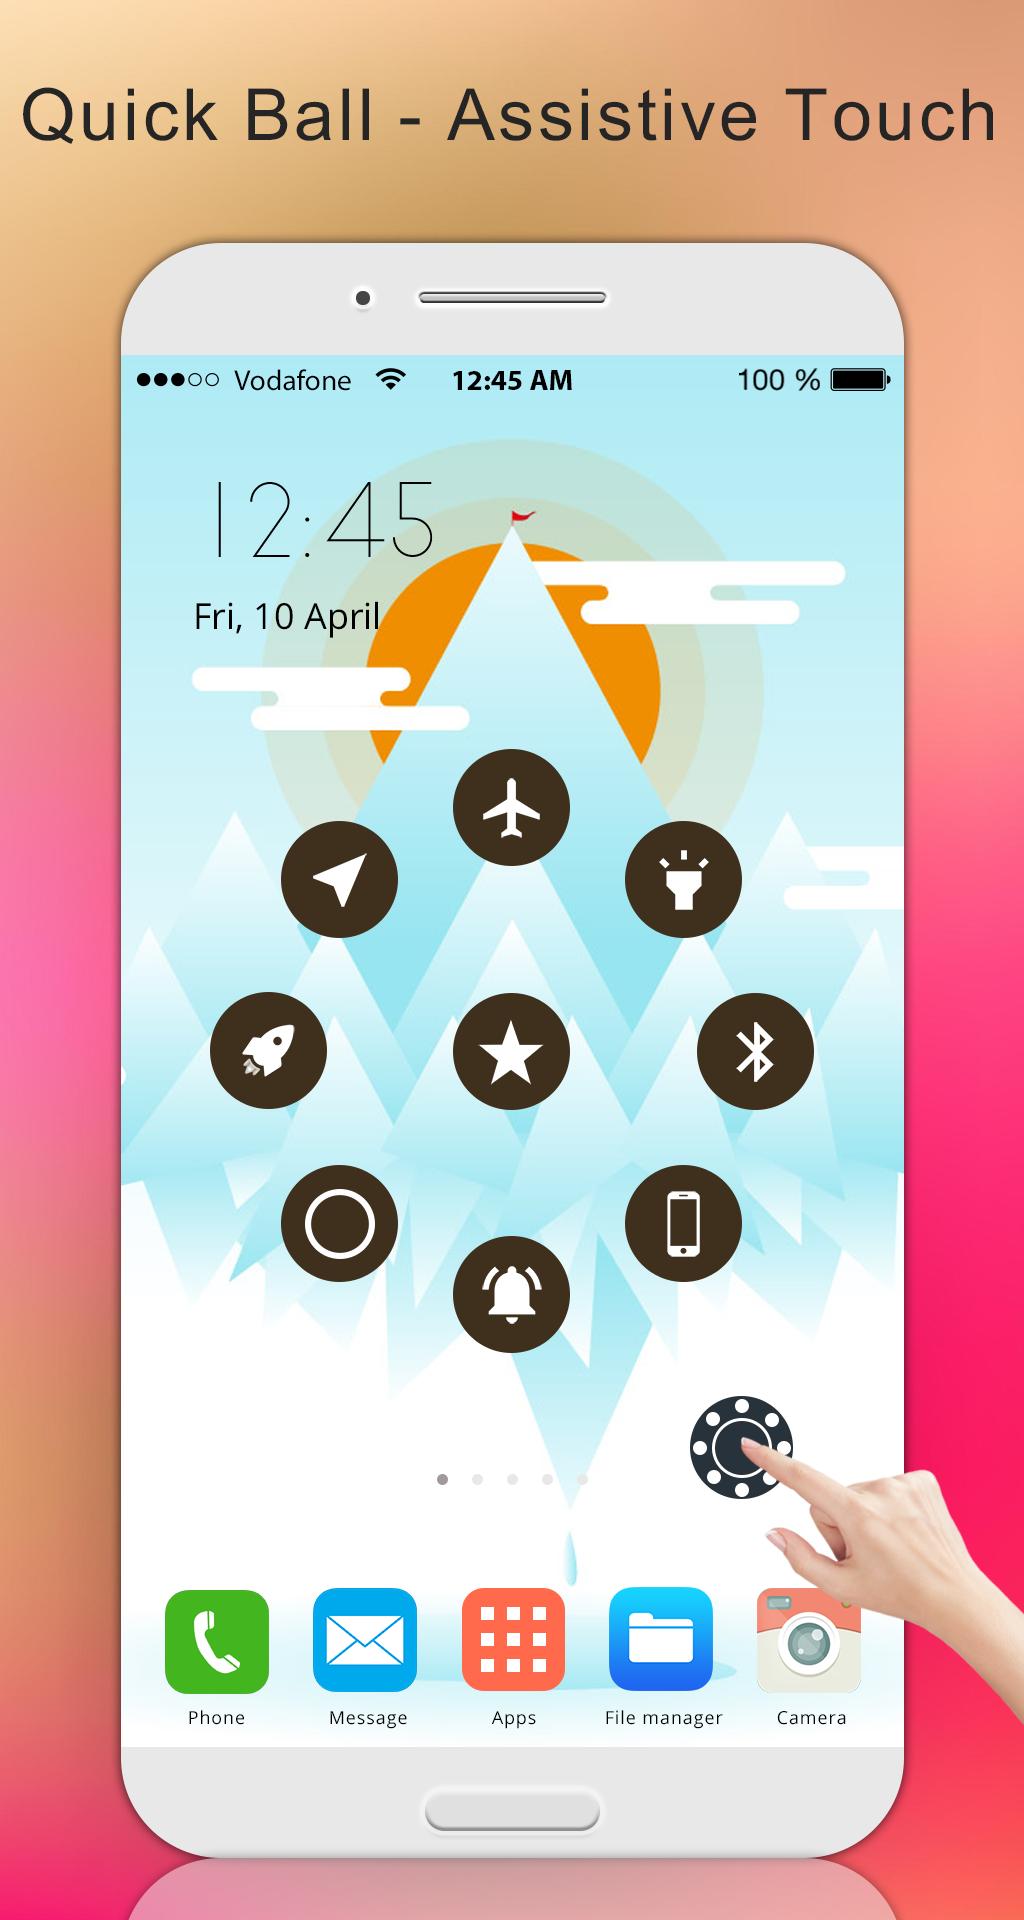 Assistive Touch - Quick Ball for Android - APK Download